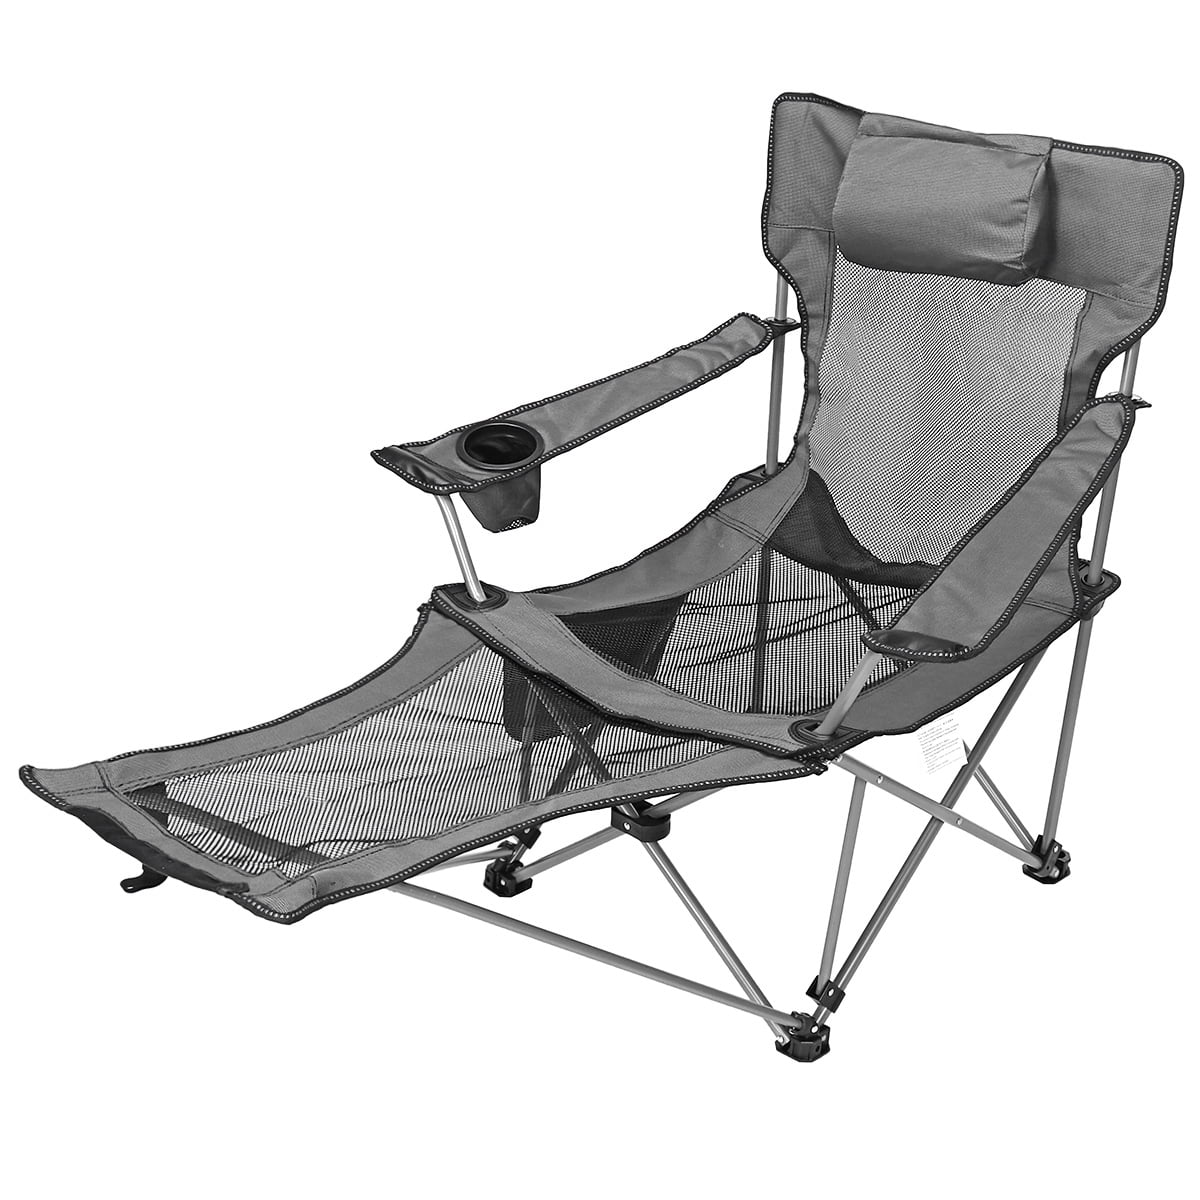 Folding Camping Chair Portable Portable Outdoor Lawn Mesh Seat with Cup Holder 